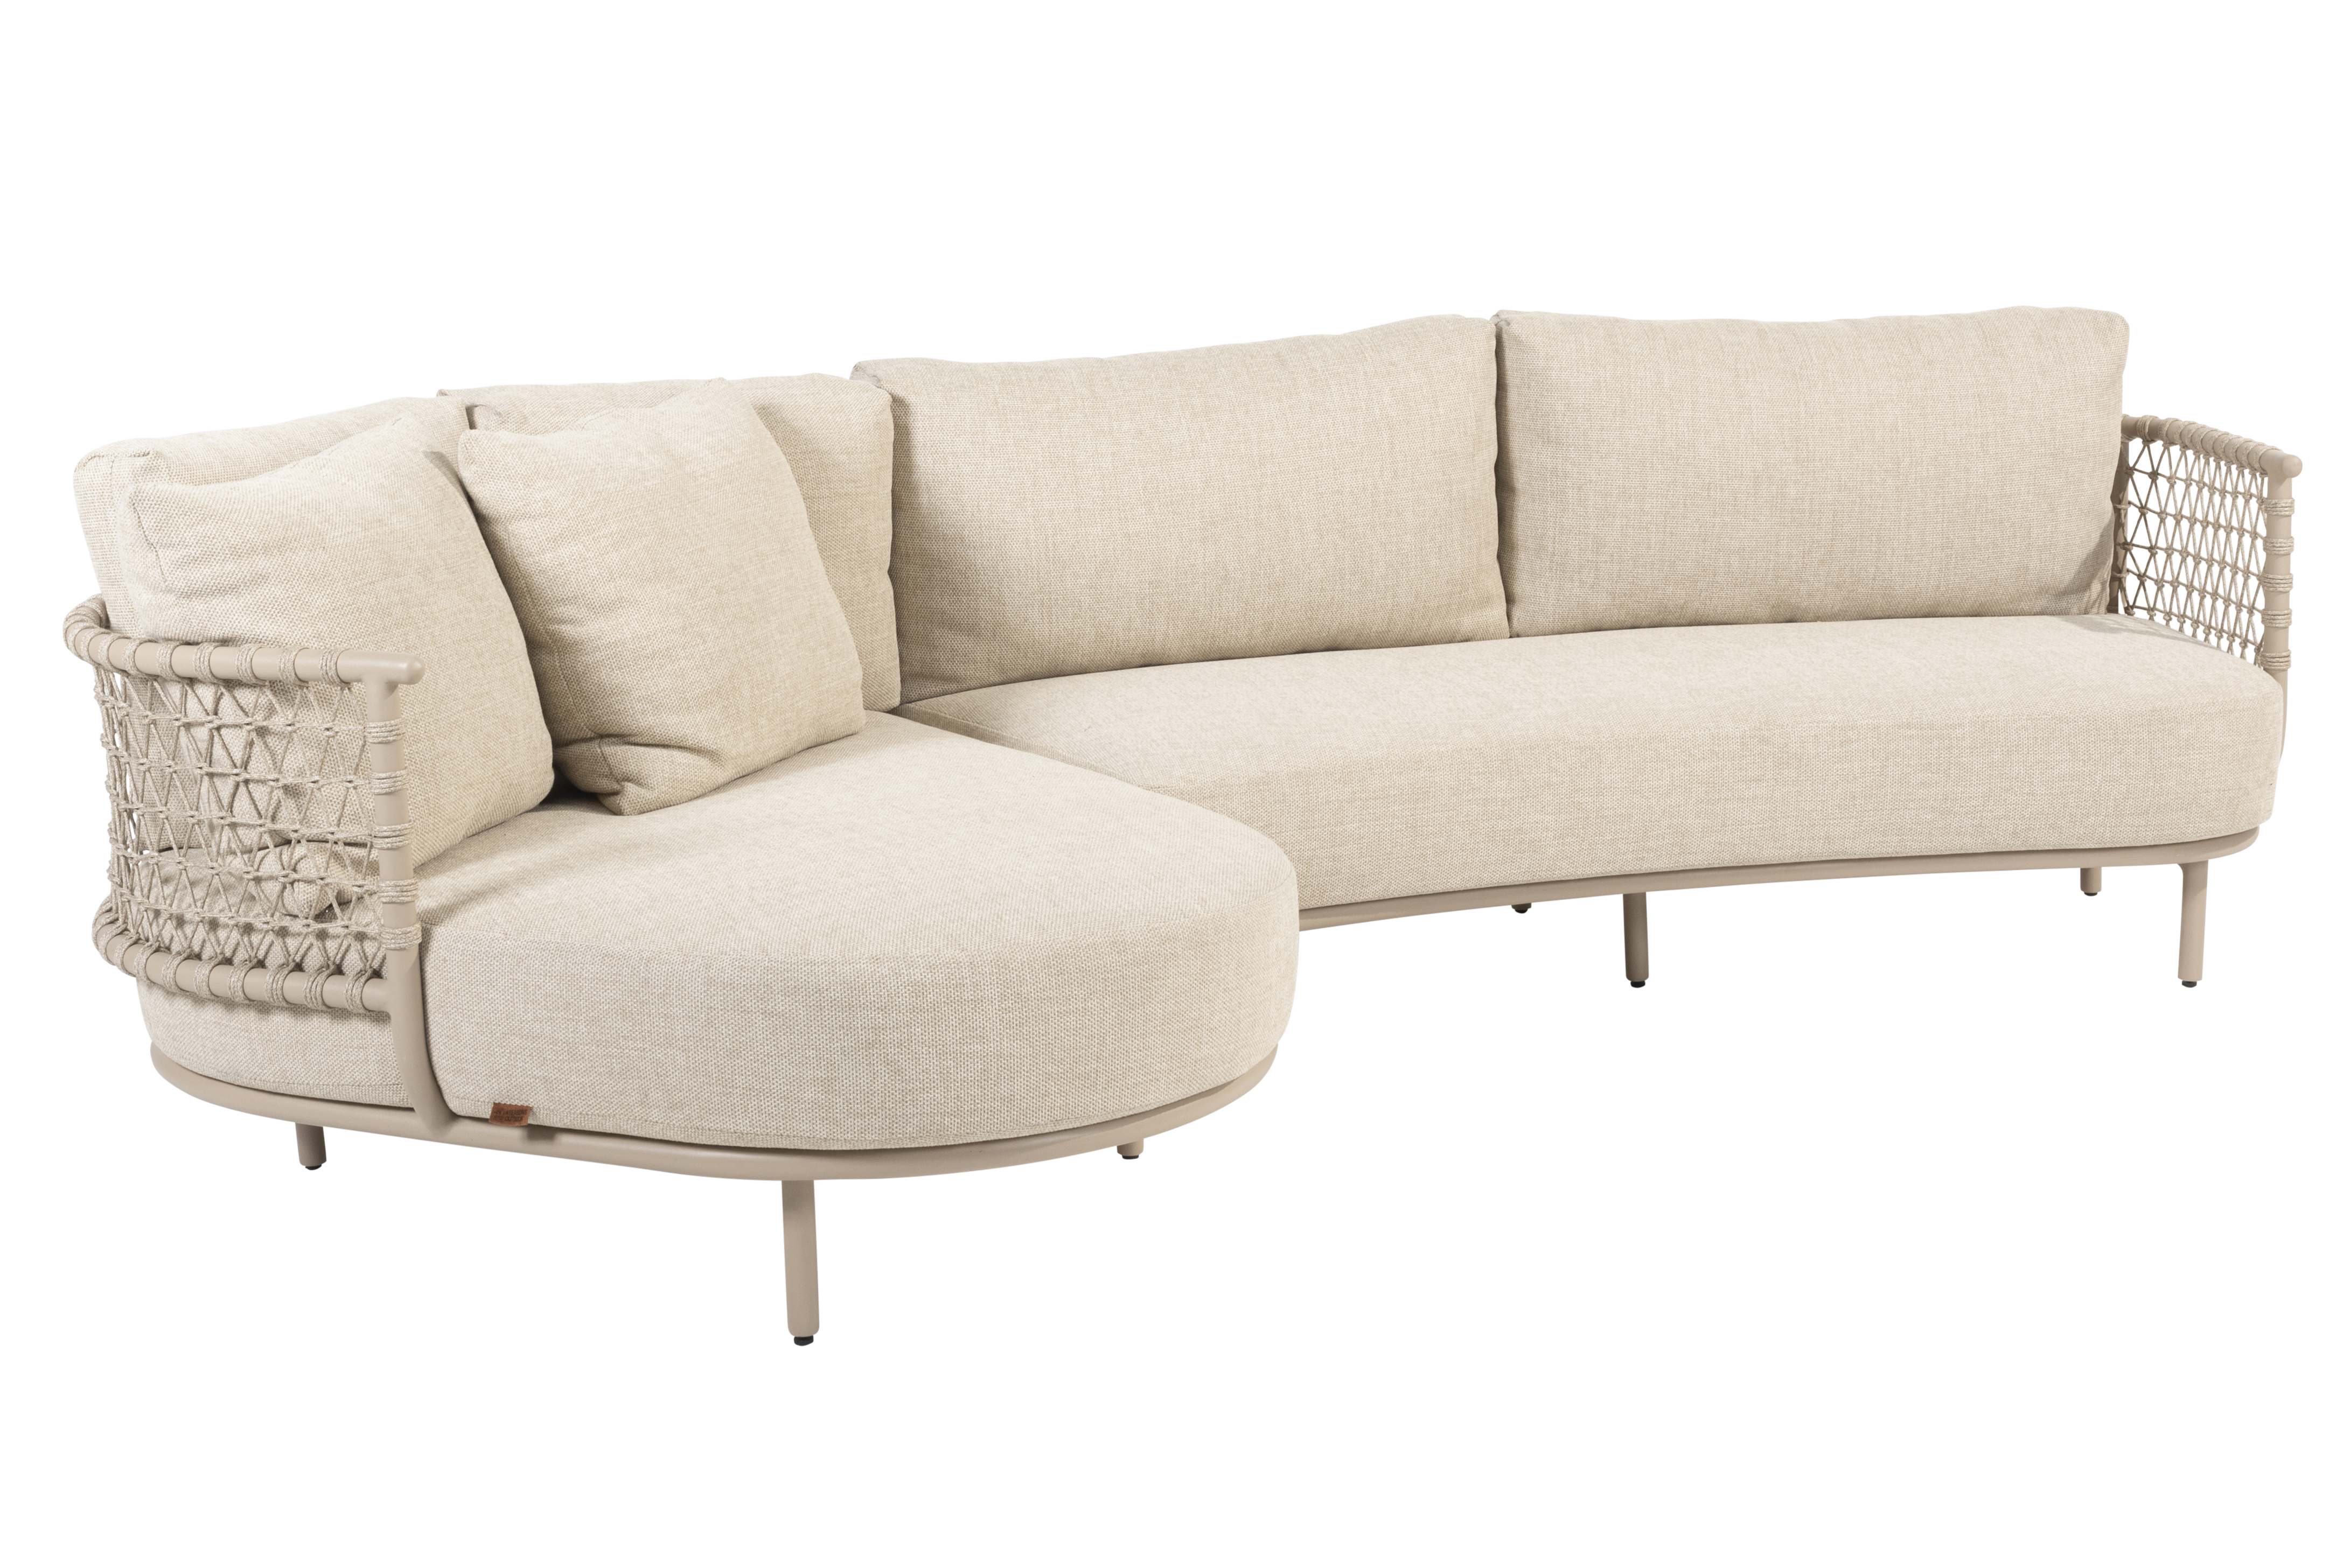 214041-214042_ Sardinia chaise lounge living sofa without table _02